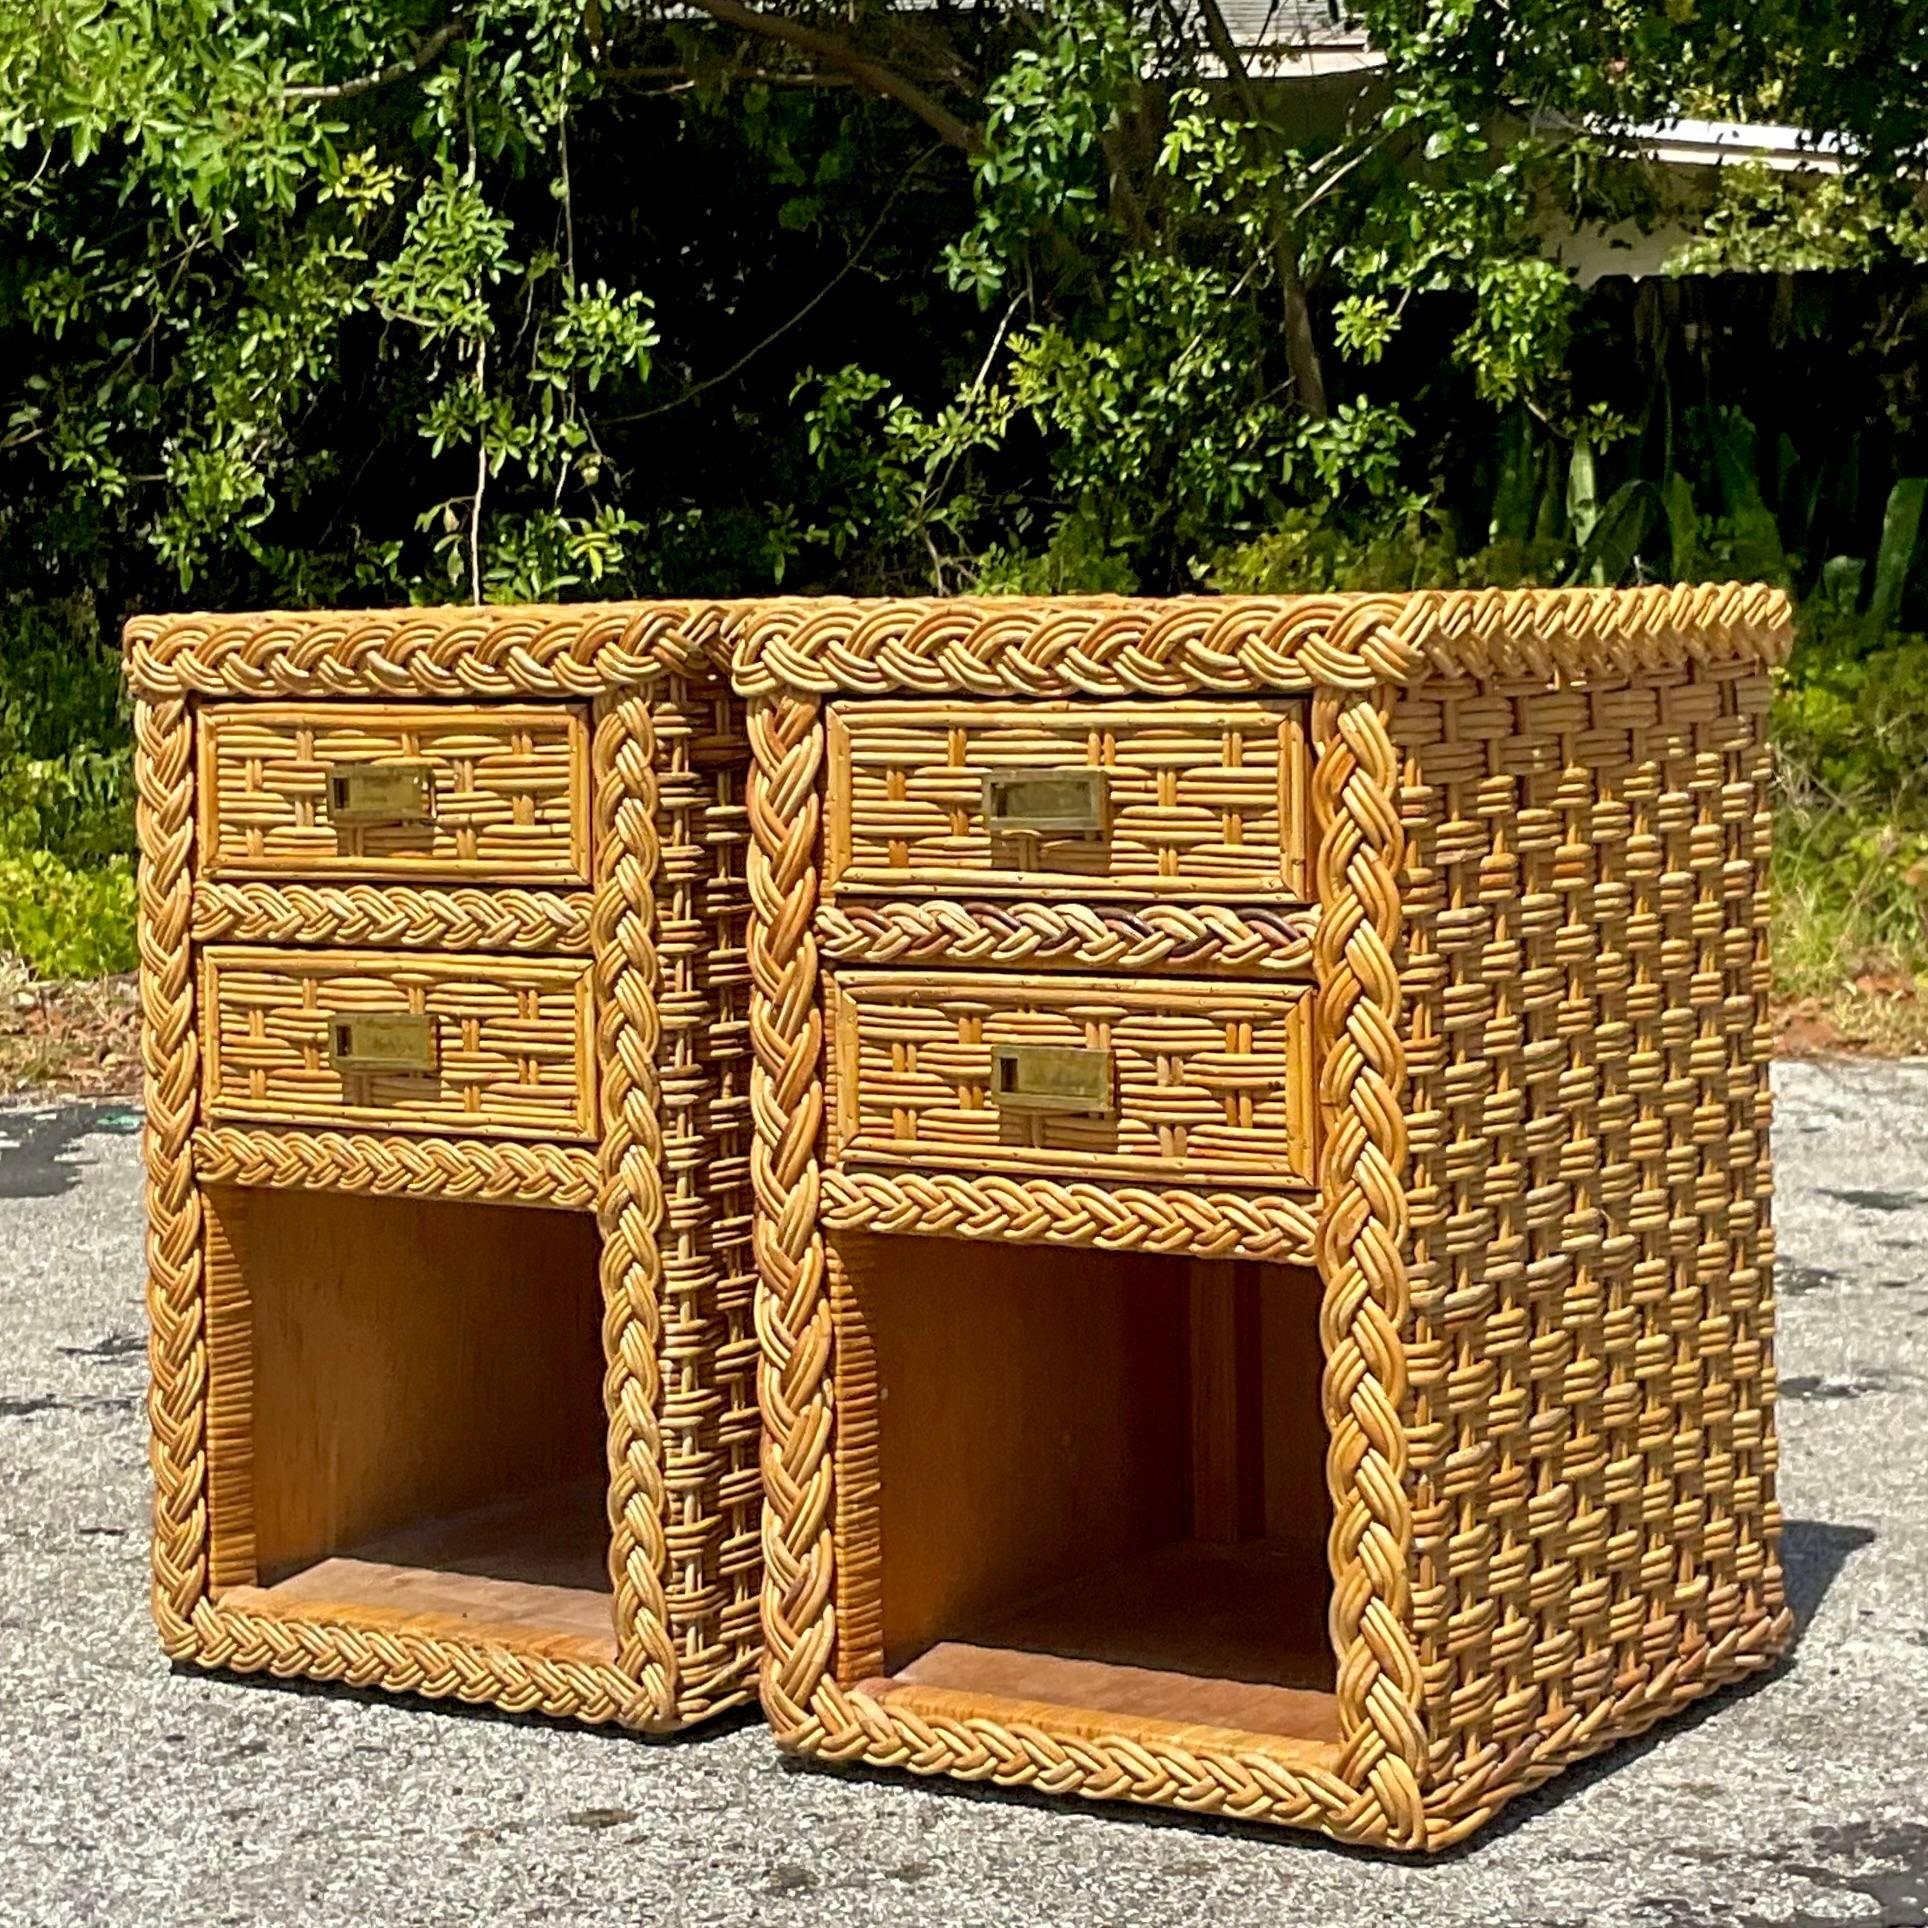 Late 20th Century Vintage Coastal Braided Rattan Nightstands - a Pair For Sale 1